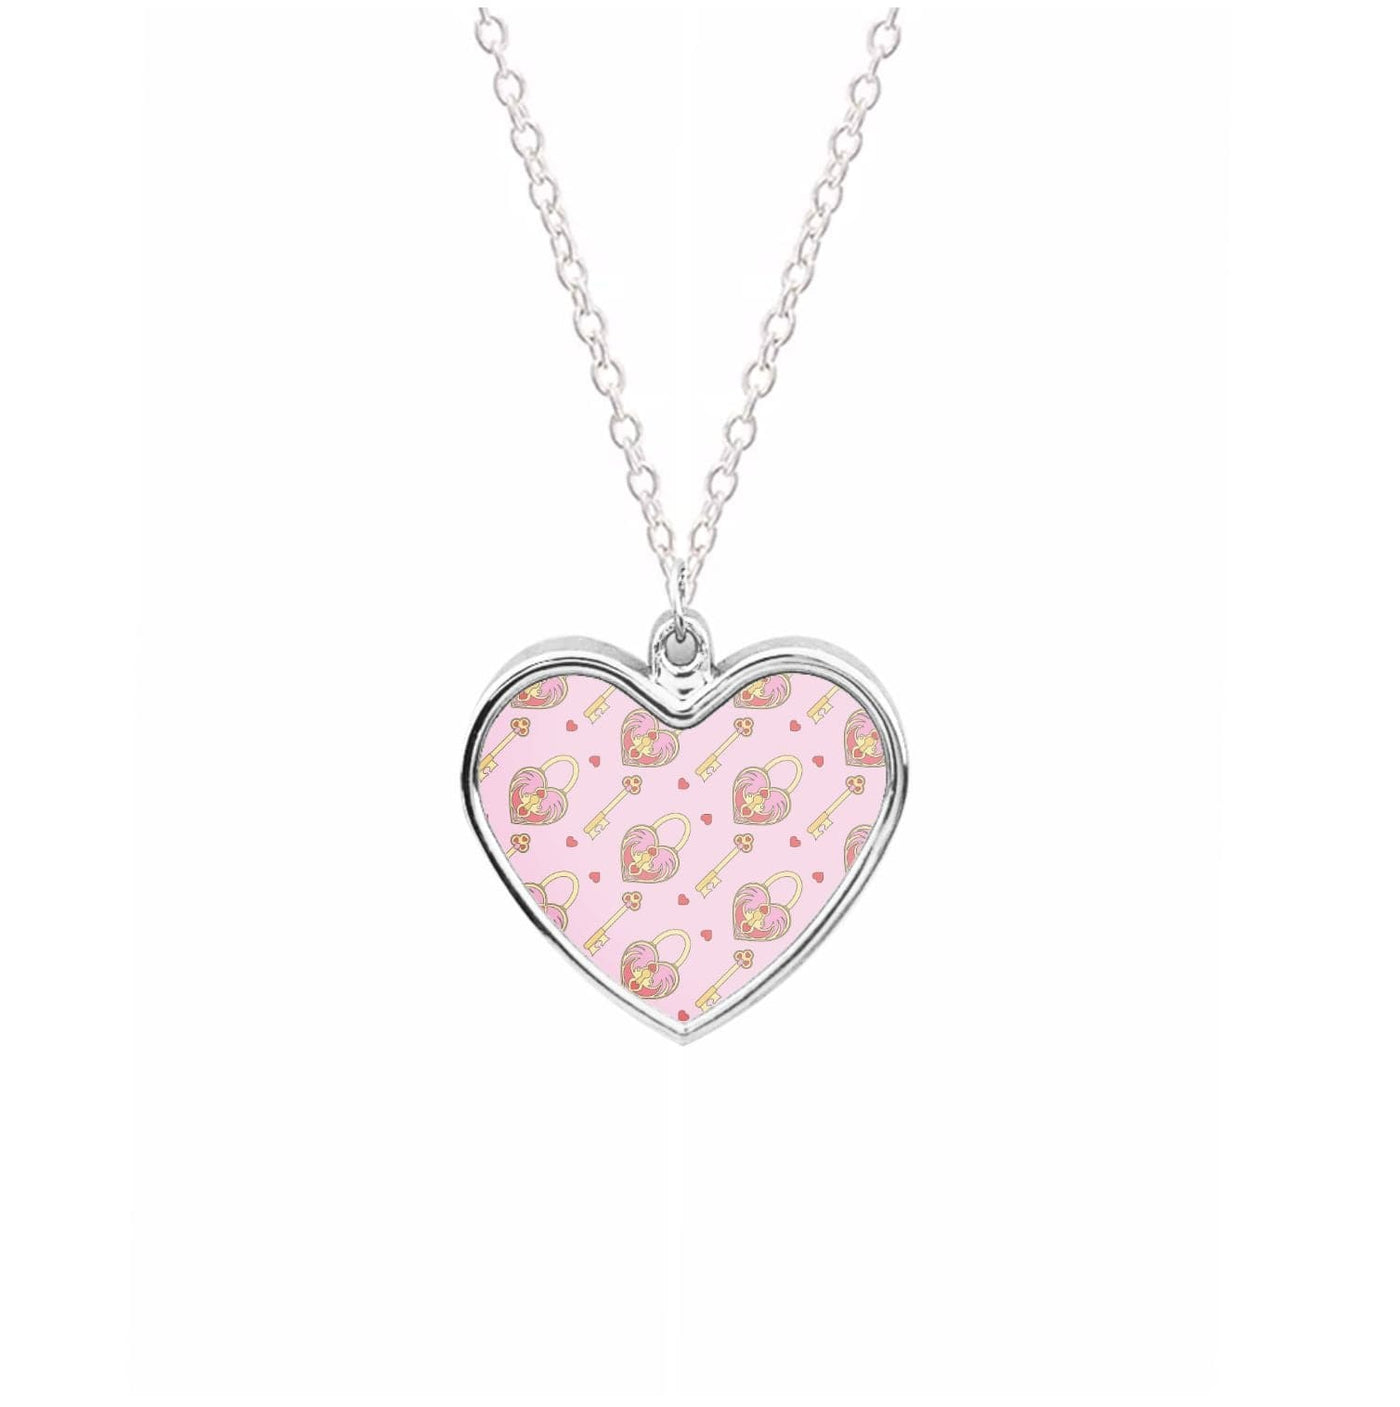 Pink Locket And Key - Valentine's Day Necklace